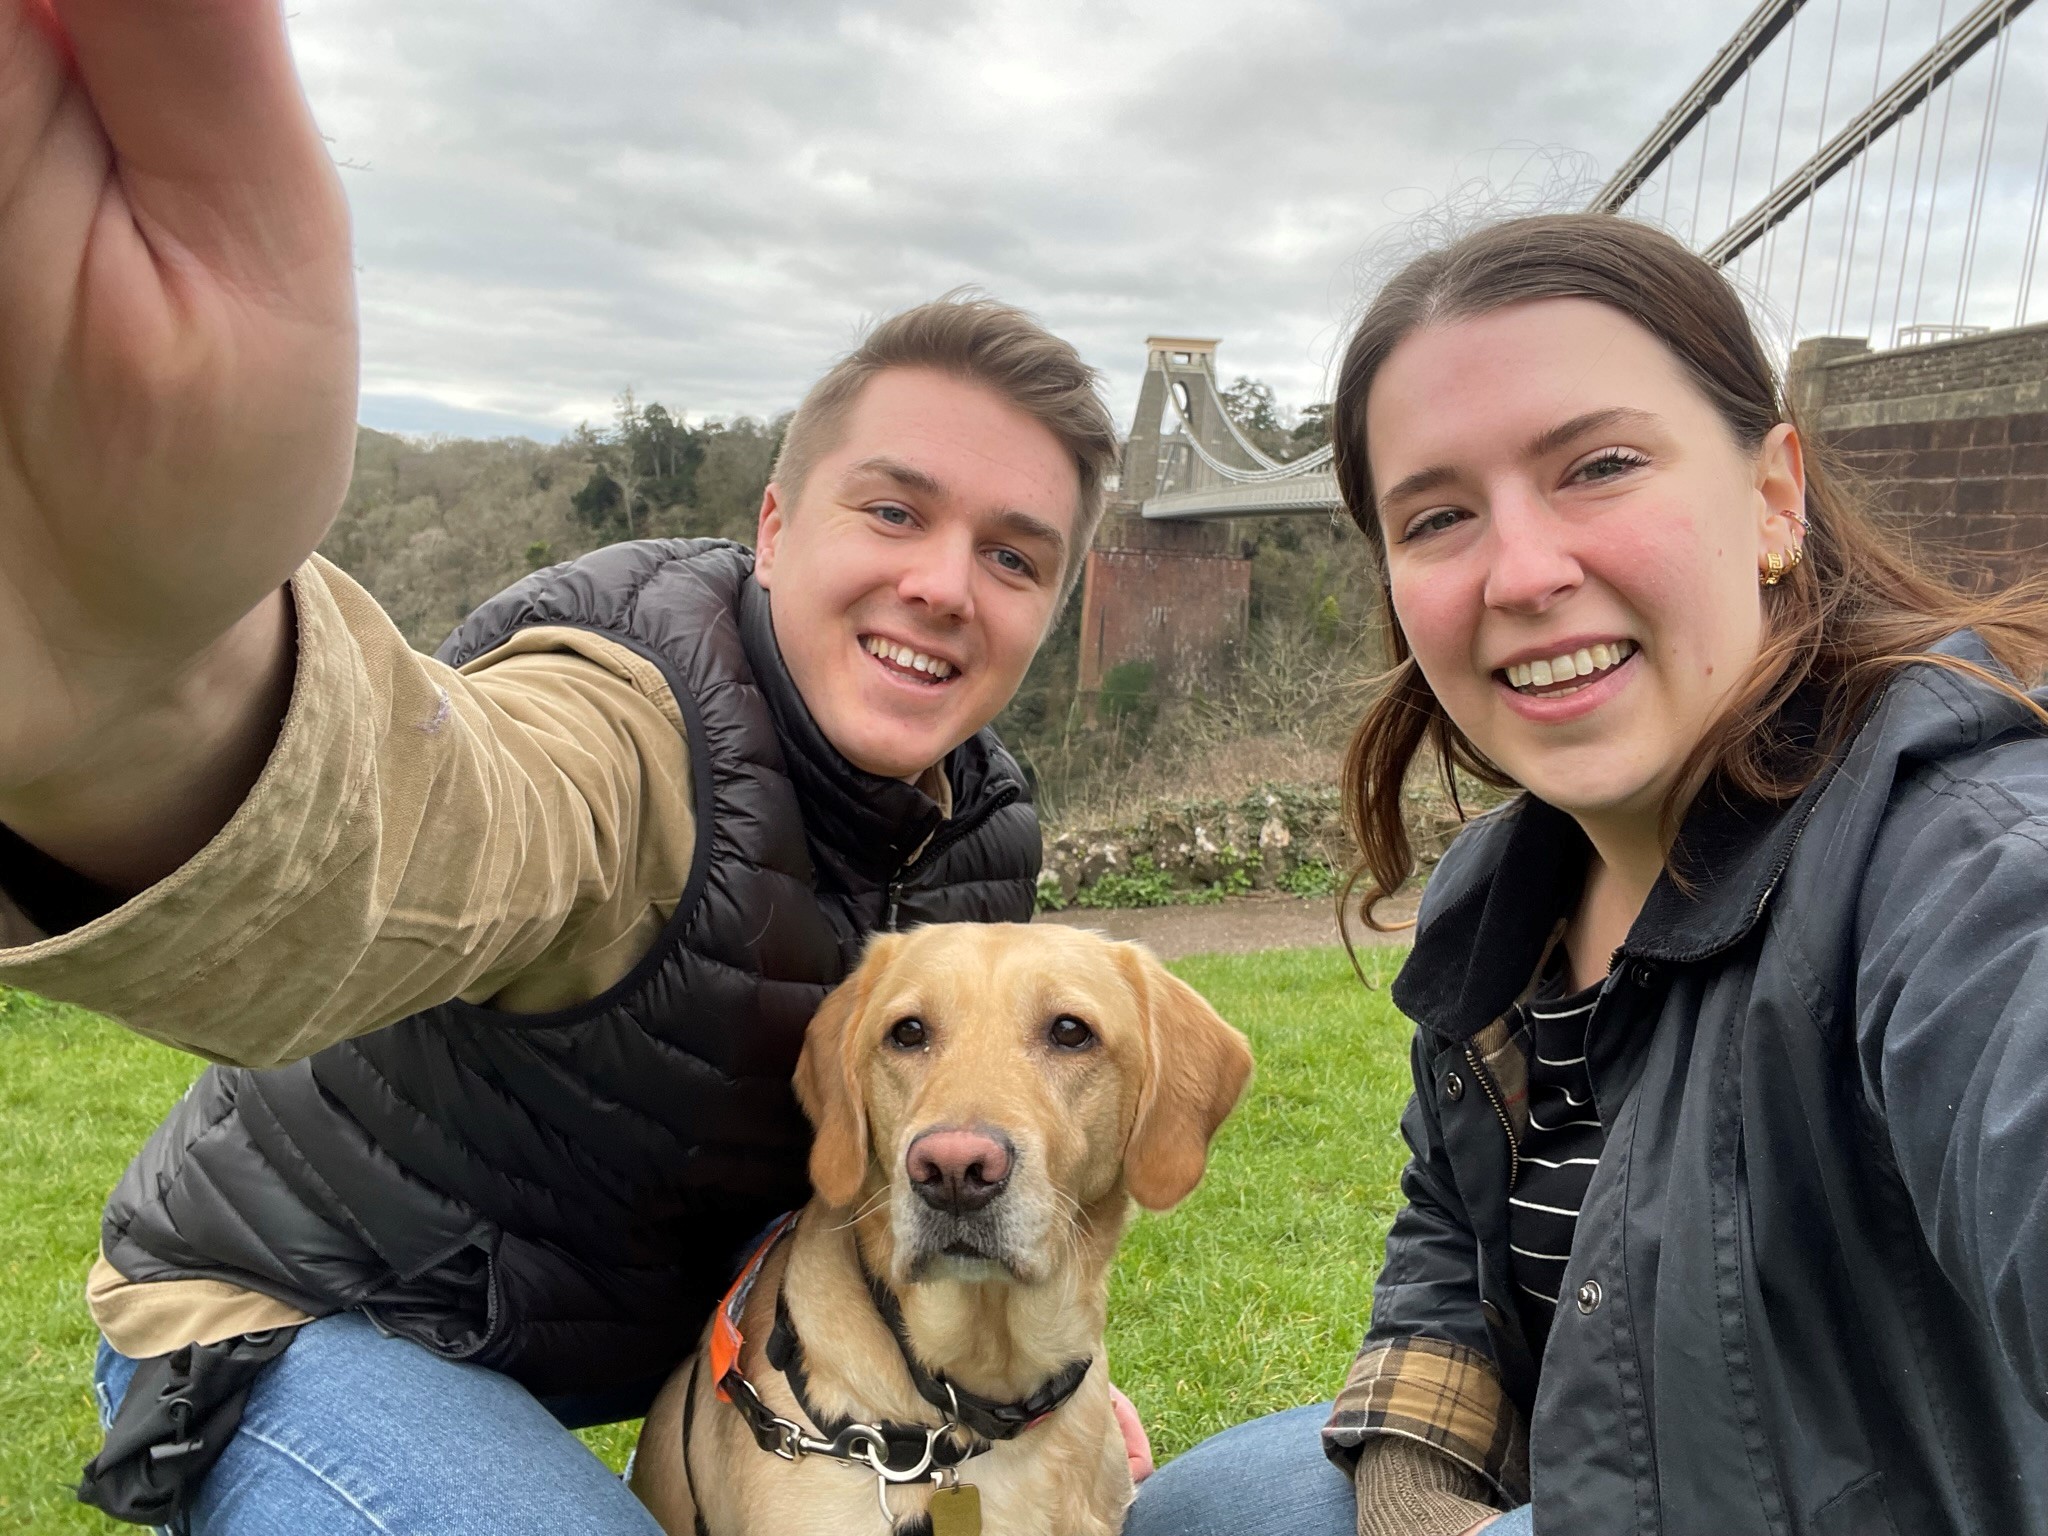 Fosterers Adam and Elle take a selfie outside with a yellow Labrador guide dog in training 